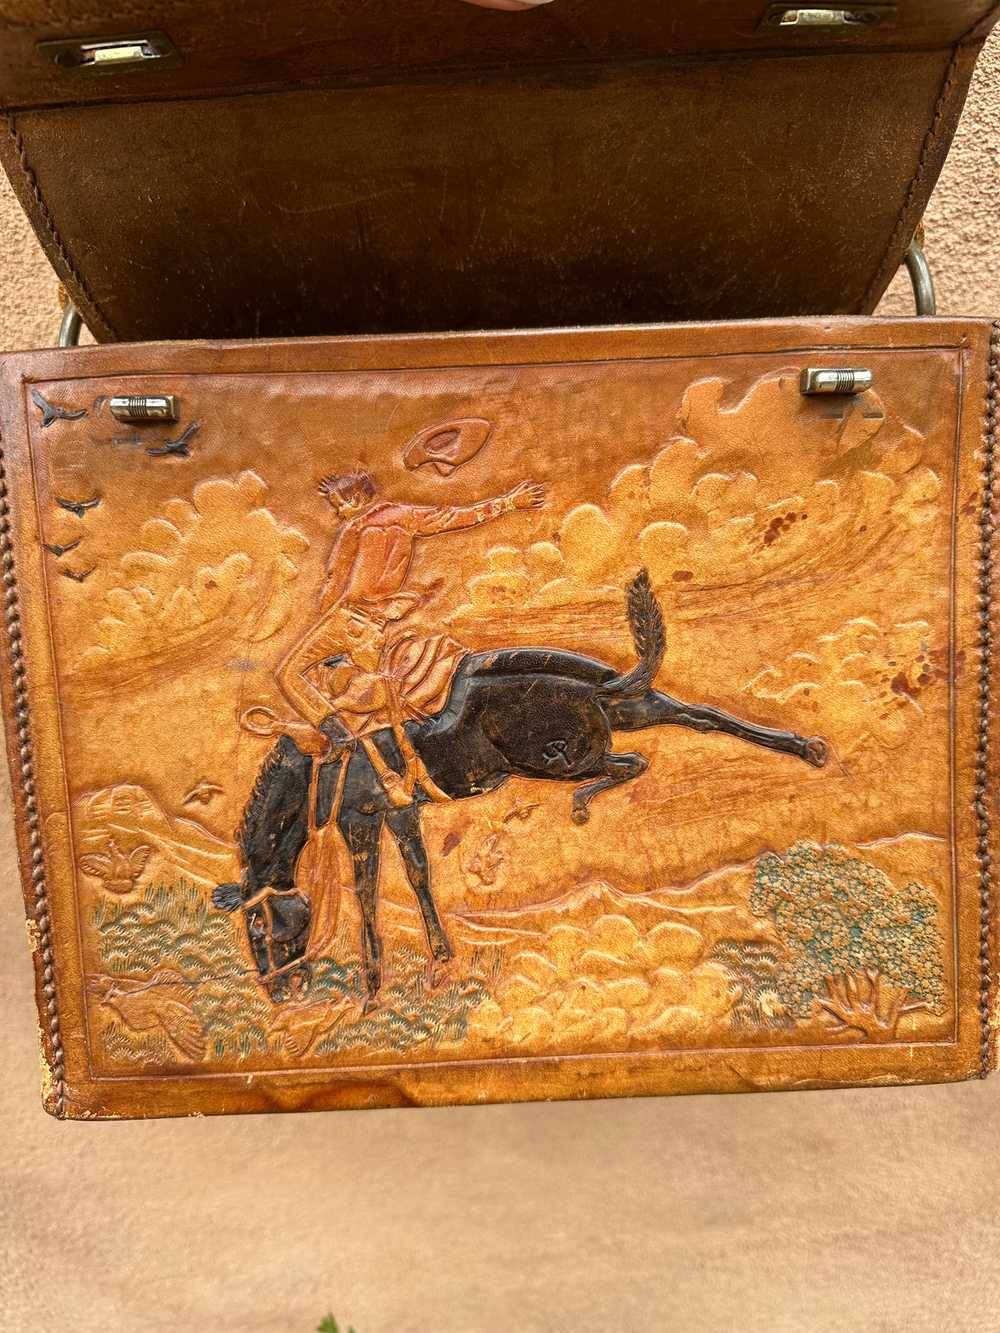 Hand Tooled Leather Cowboy Tack Box/Carry Case - image 2